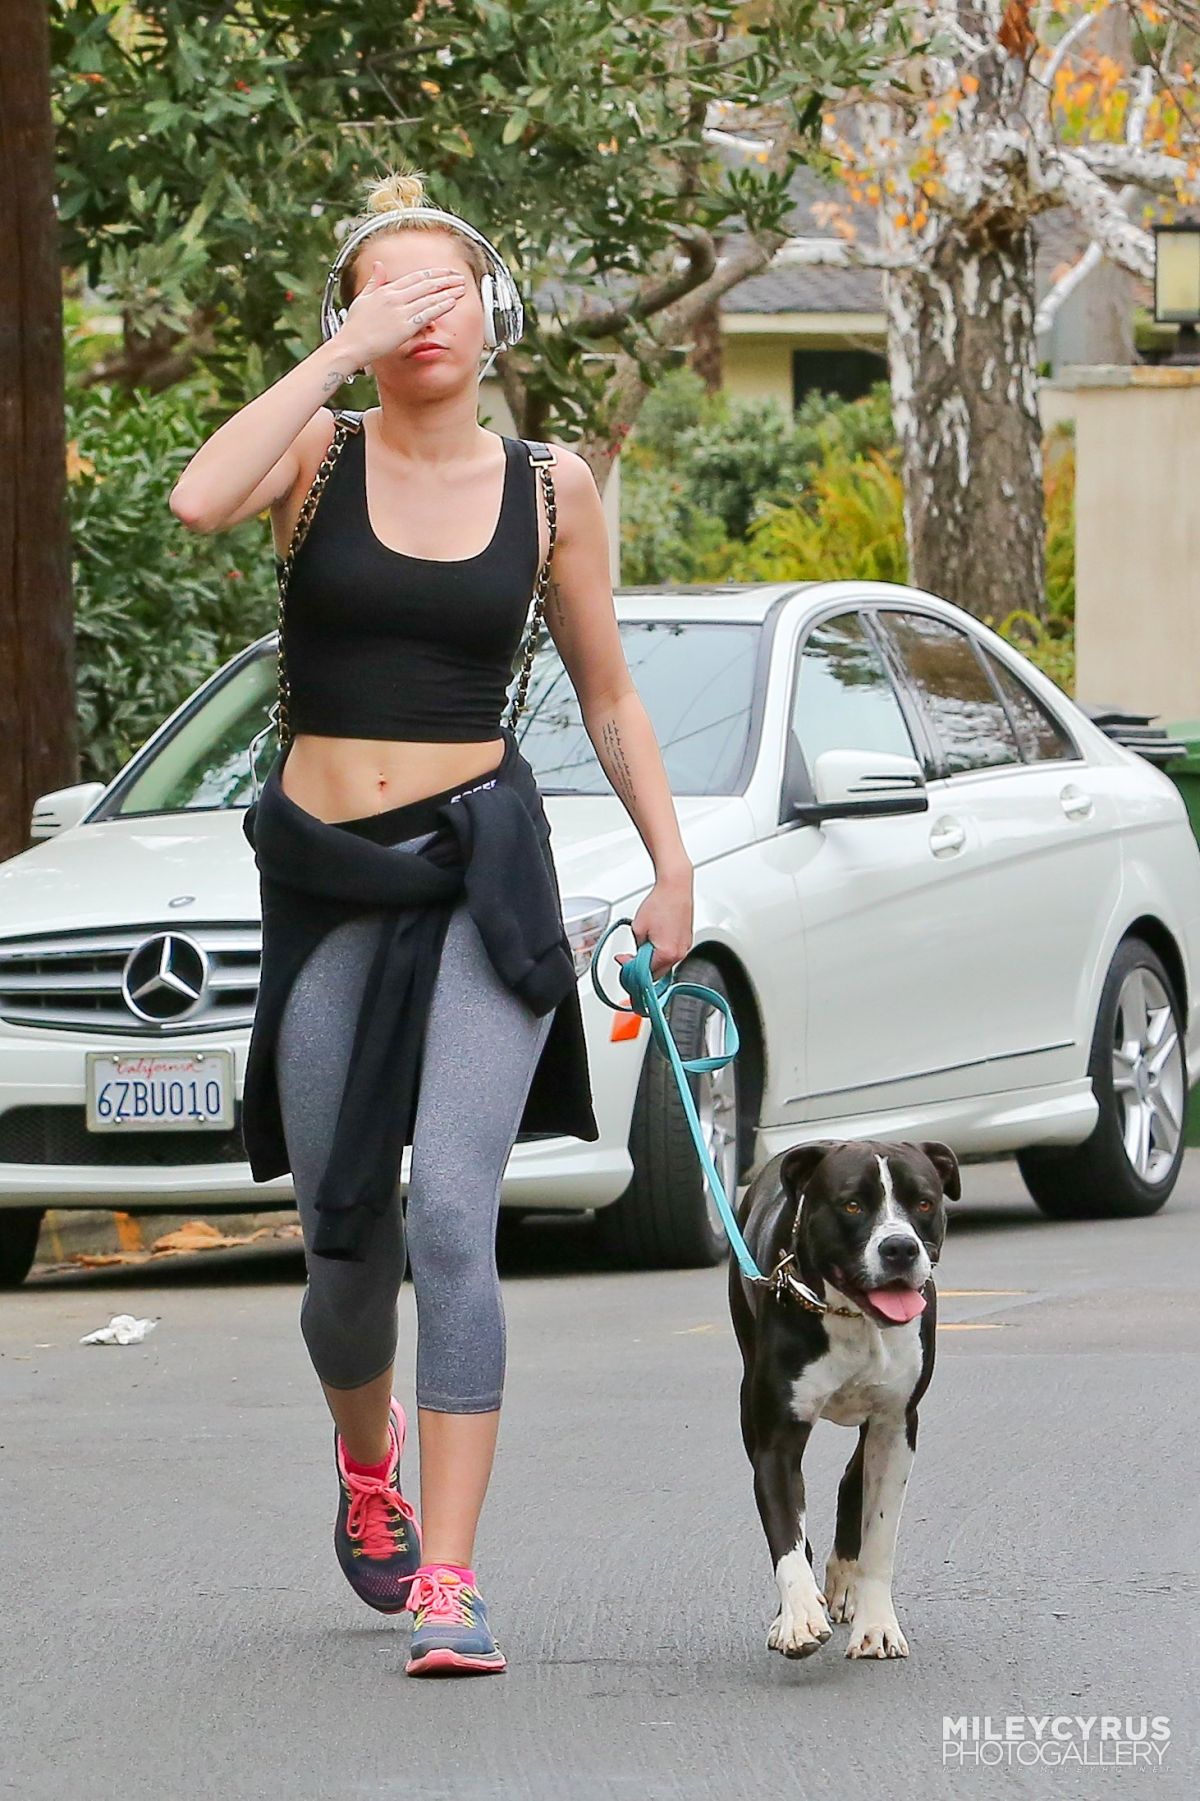 MILEY CYRUS in Tight Walks Her Dog Out in Los Angeles - HawtCelebs